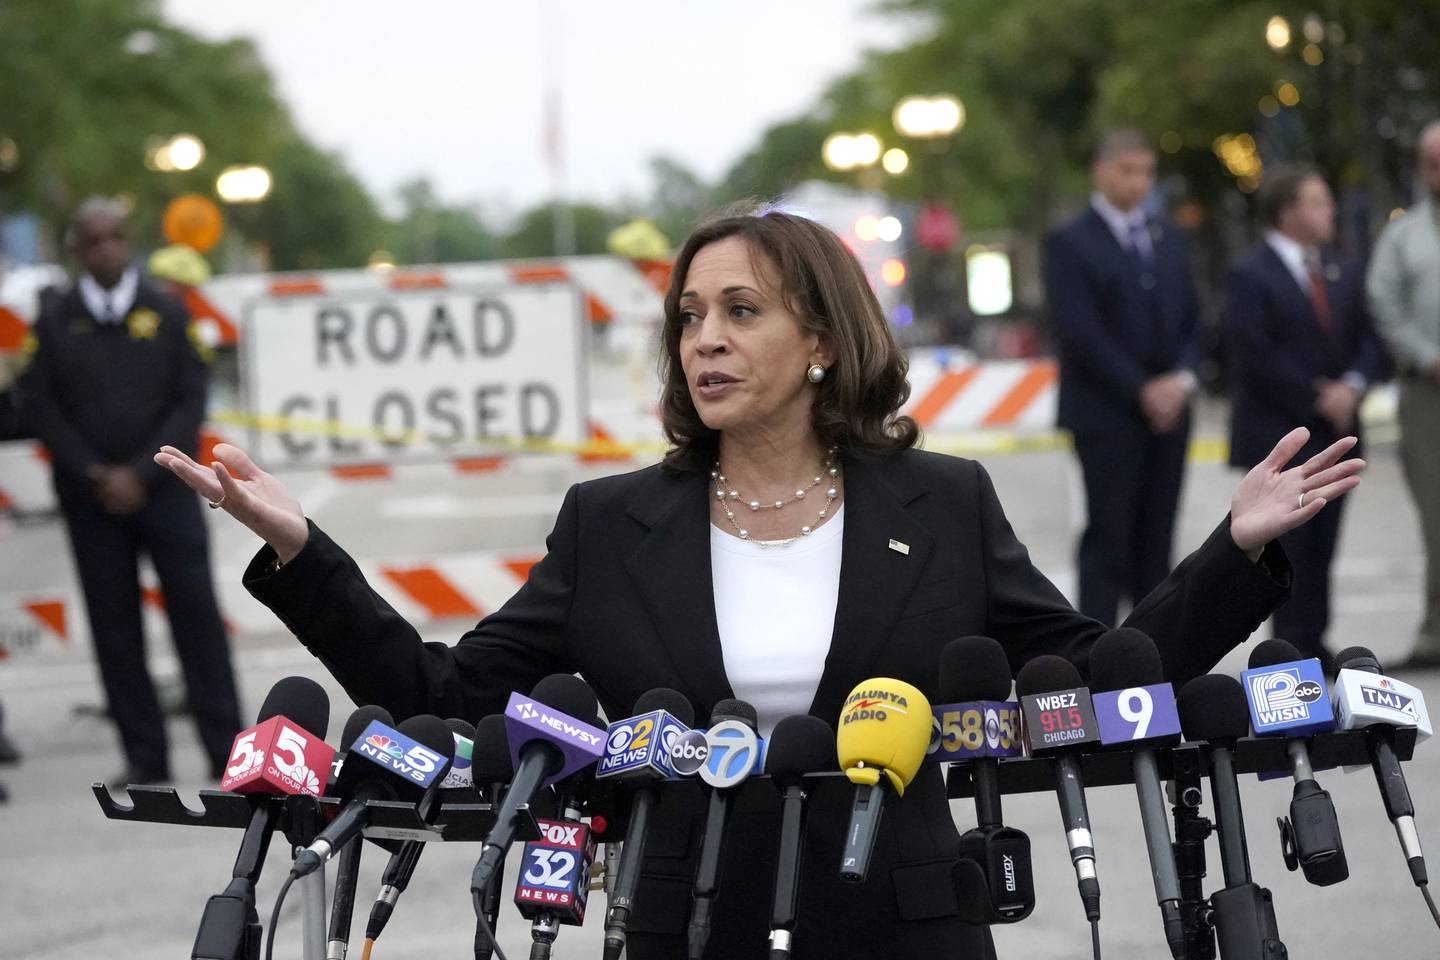 Vice president Kamala Harris speaks to those gathered near the site of Monday's mass shooting during the Highland Park July 4th parade Tuesday, July 5, 2022, in Highland Park, Ill. (AP Photo/Charles Rex Arbogast)